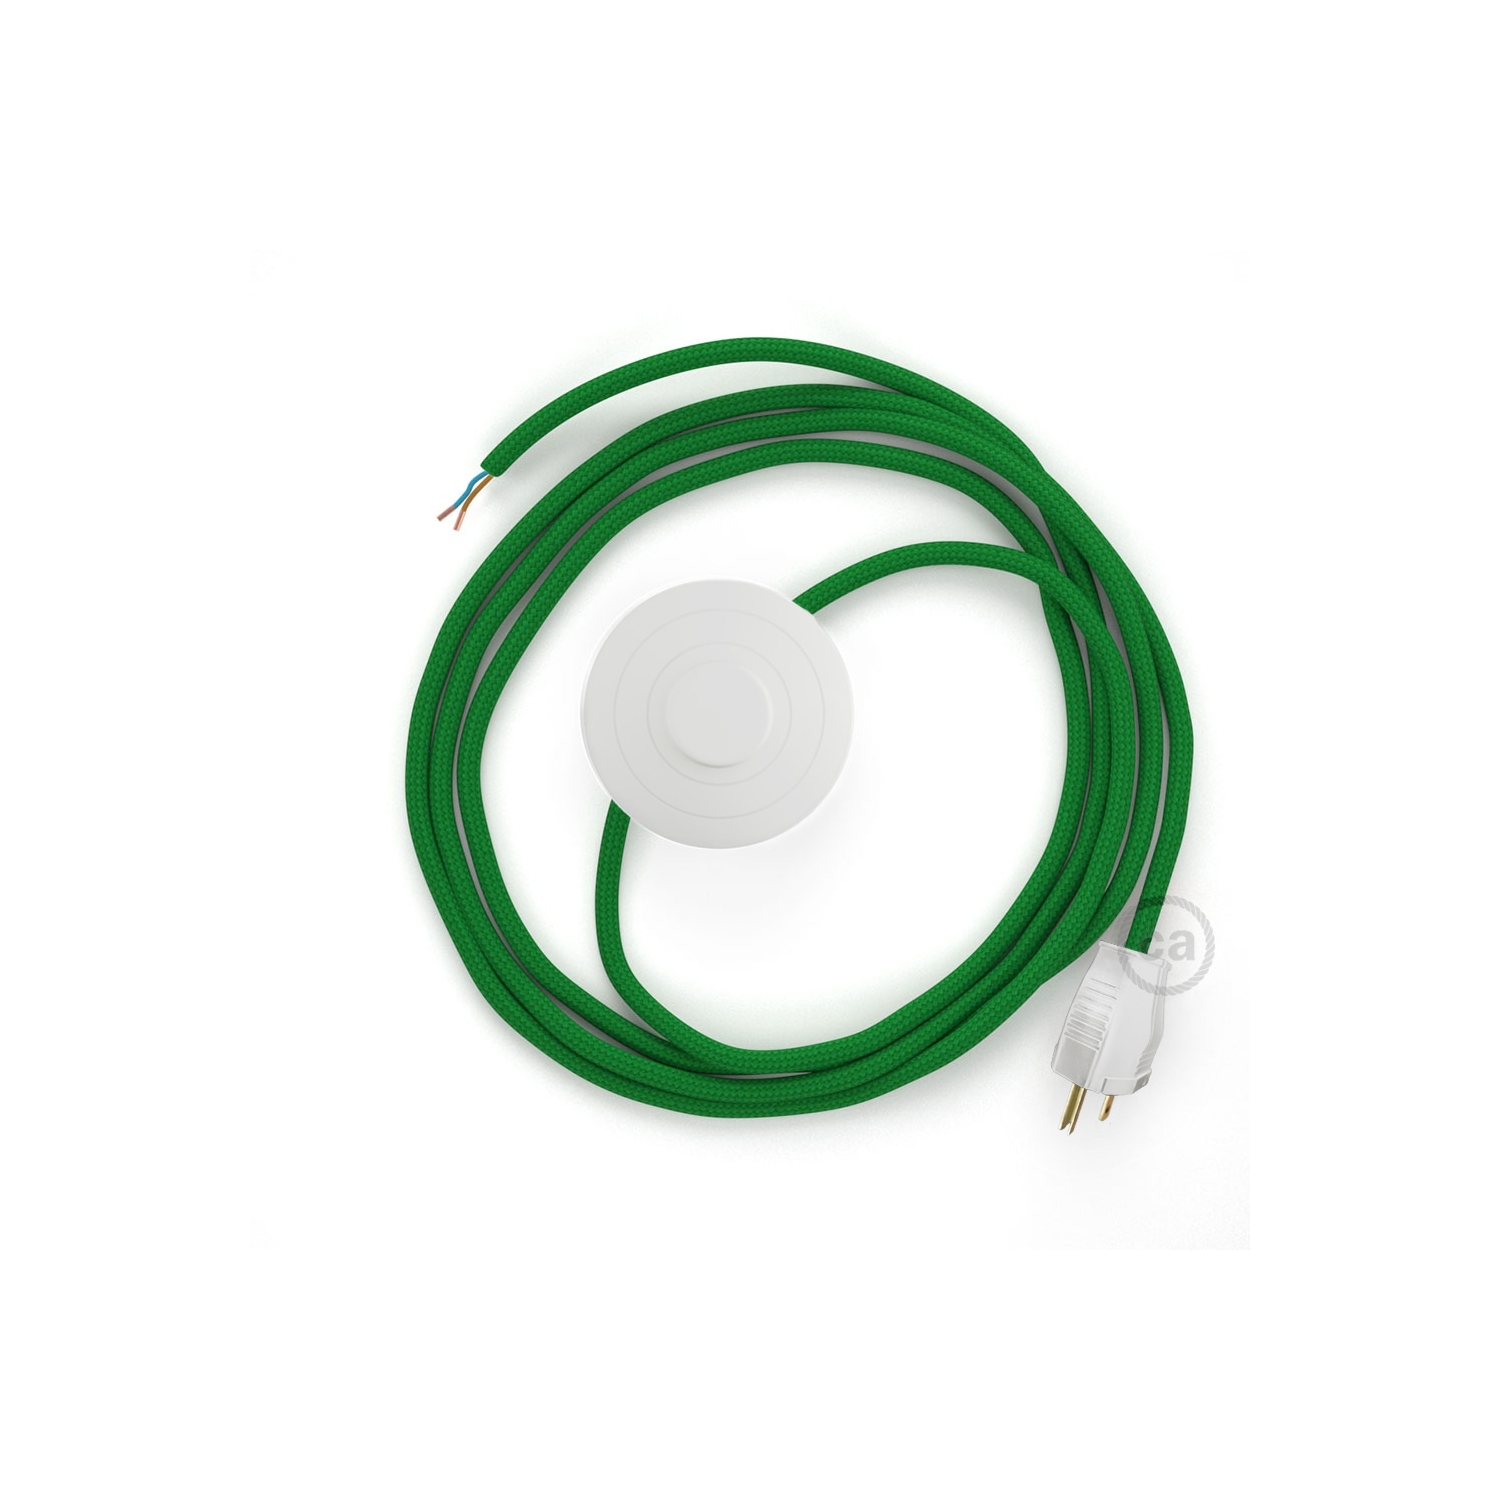 Power Cord with foot switch, RM06 Green Rayon - Choose color of switch/plug